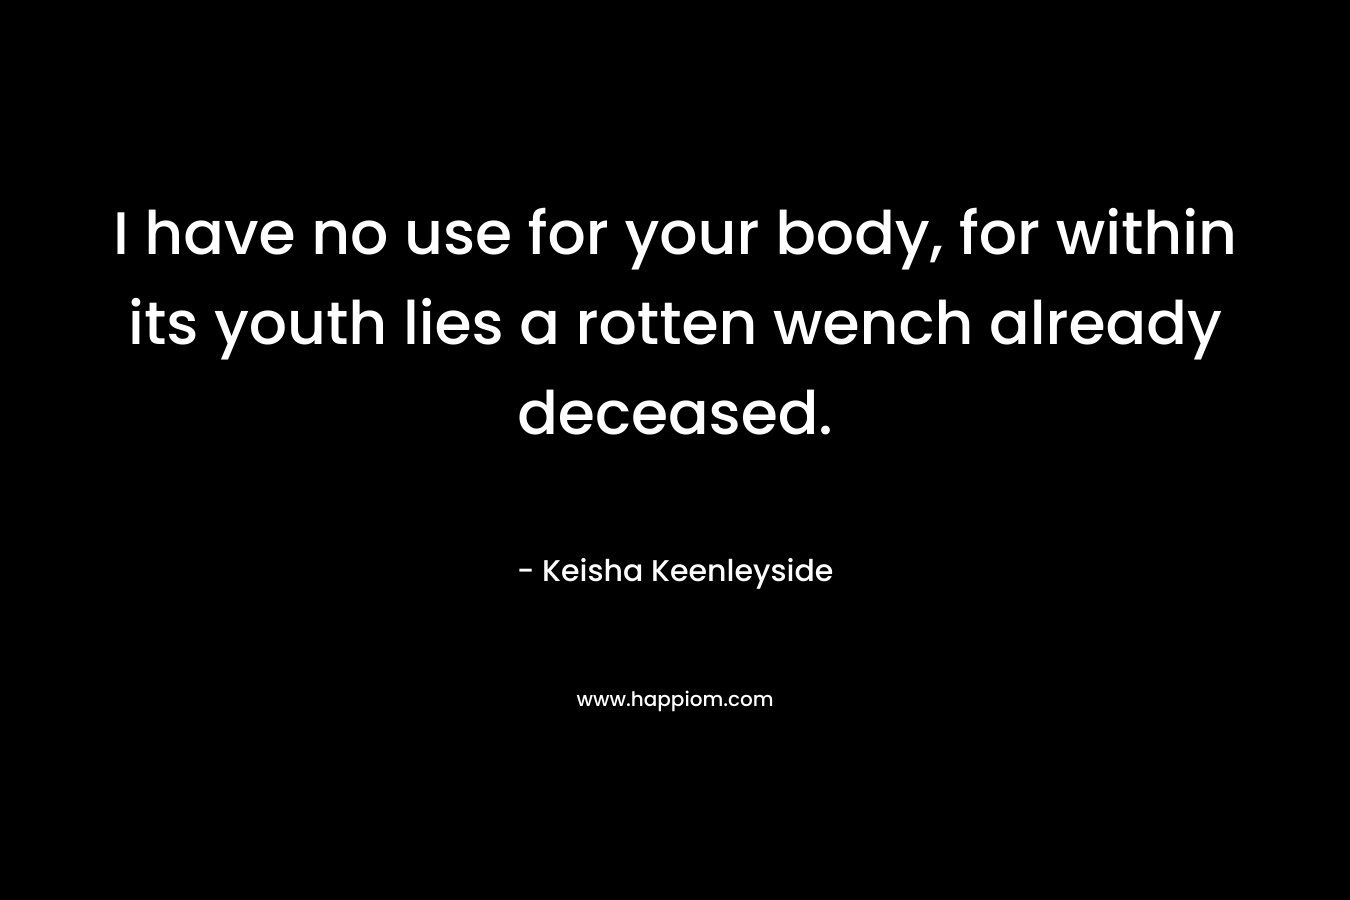 I have no use for your body, for within its youth lies a rotten wench already deceased. – Keisha Keenleyside